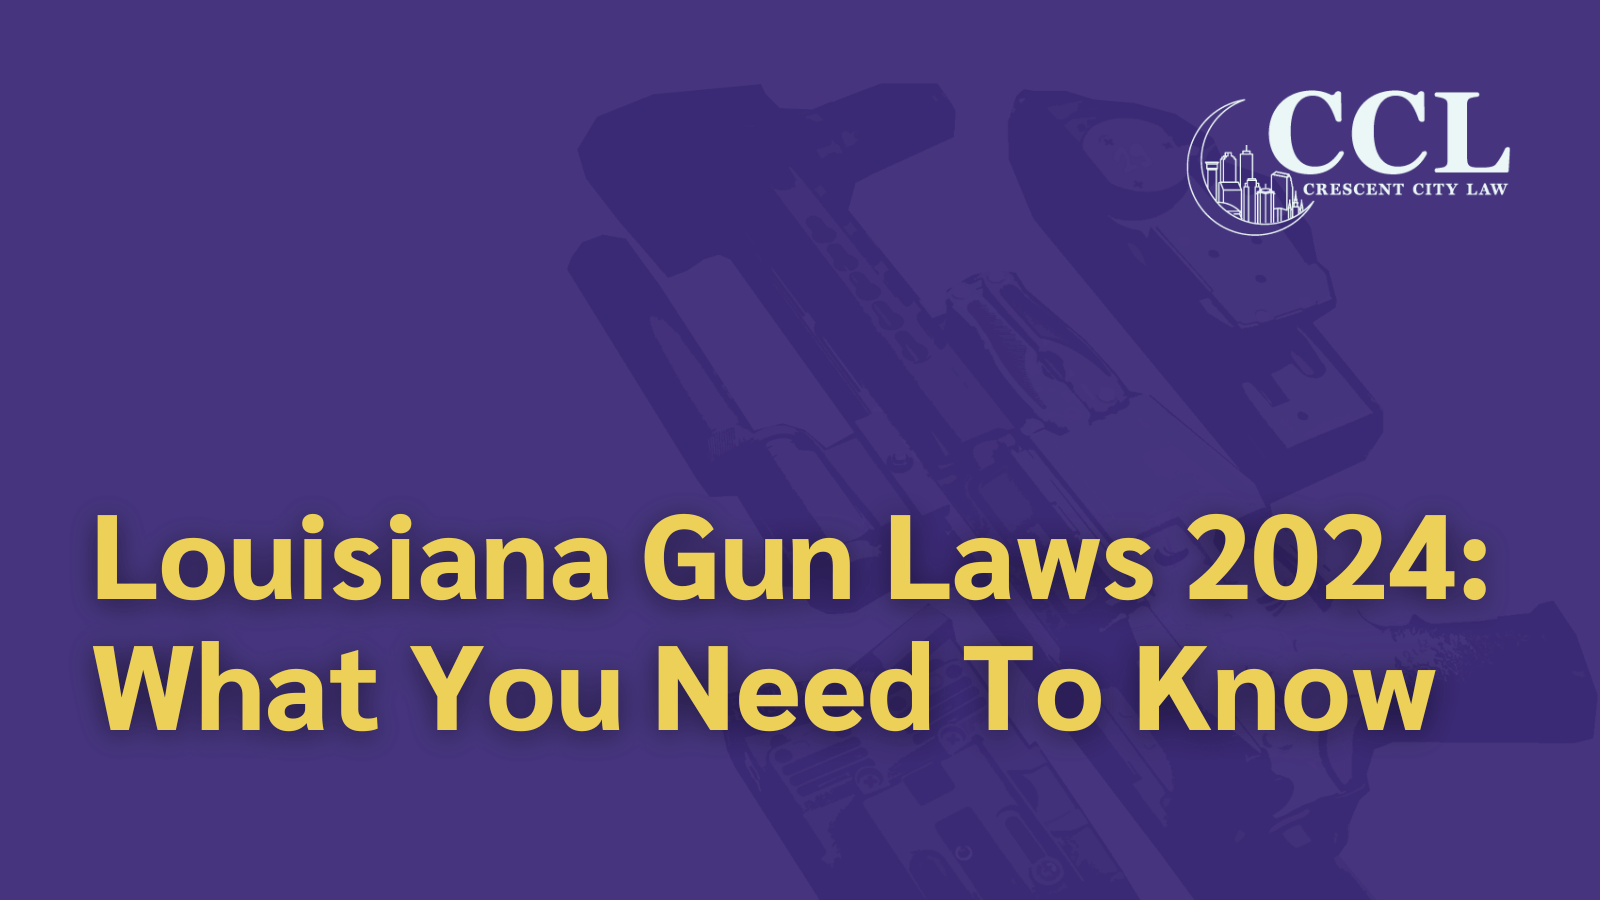 Louisiana Gun Laws 2024 What You Need To Know